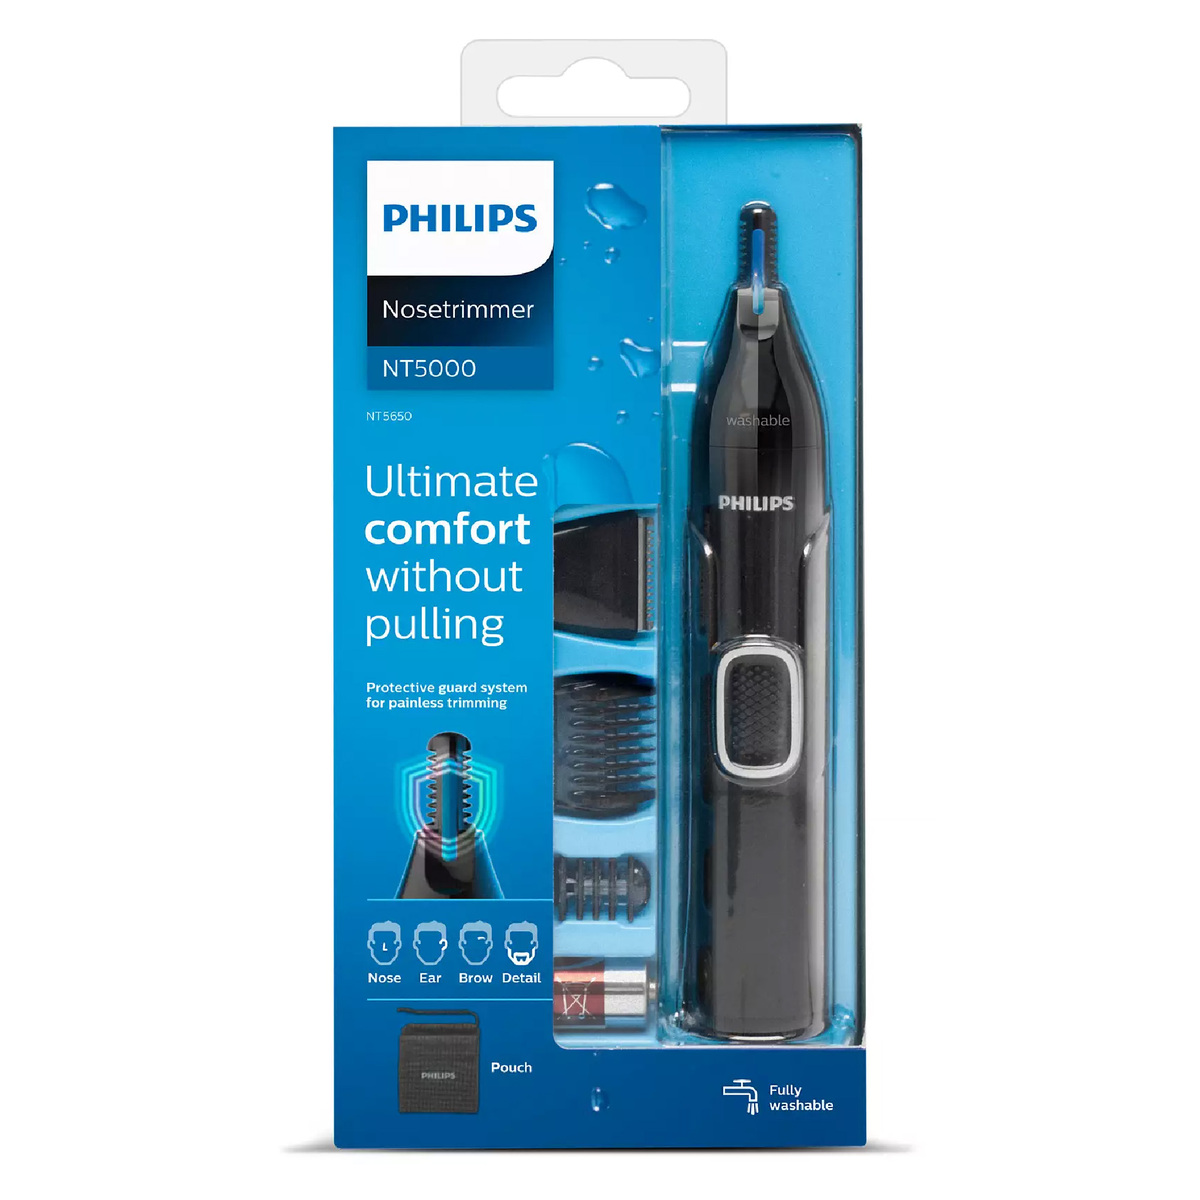 Philips Nose, Ear and Eyebrow Trimmer NT-5650